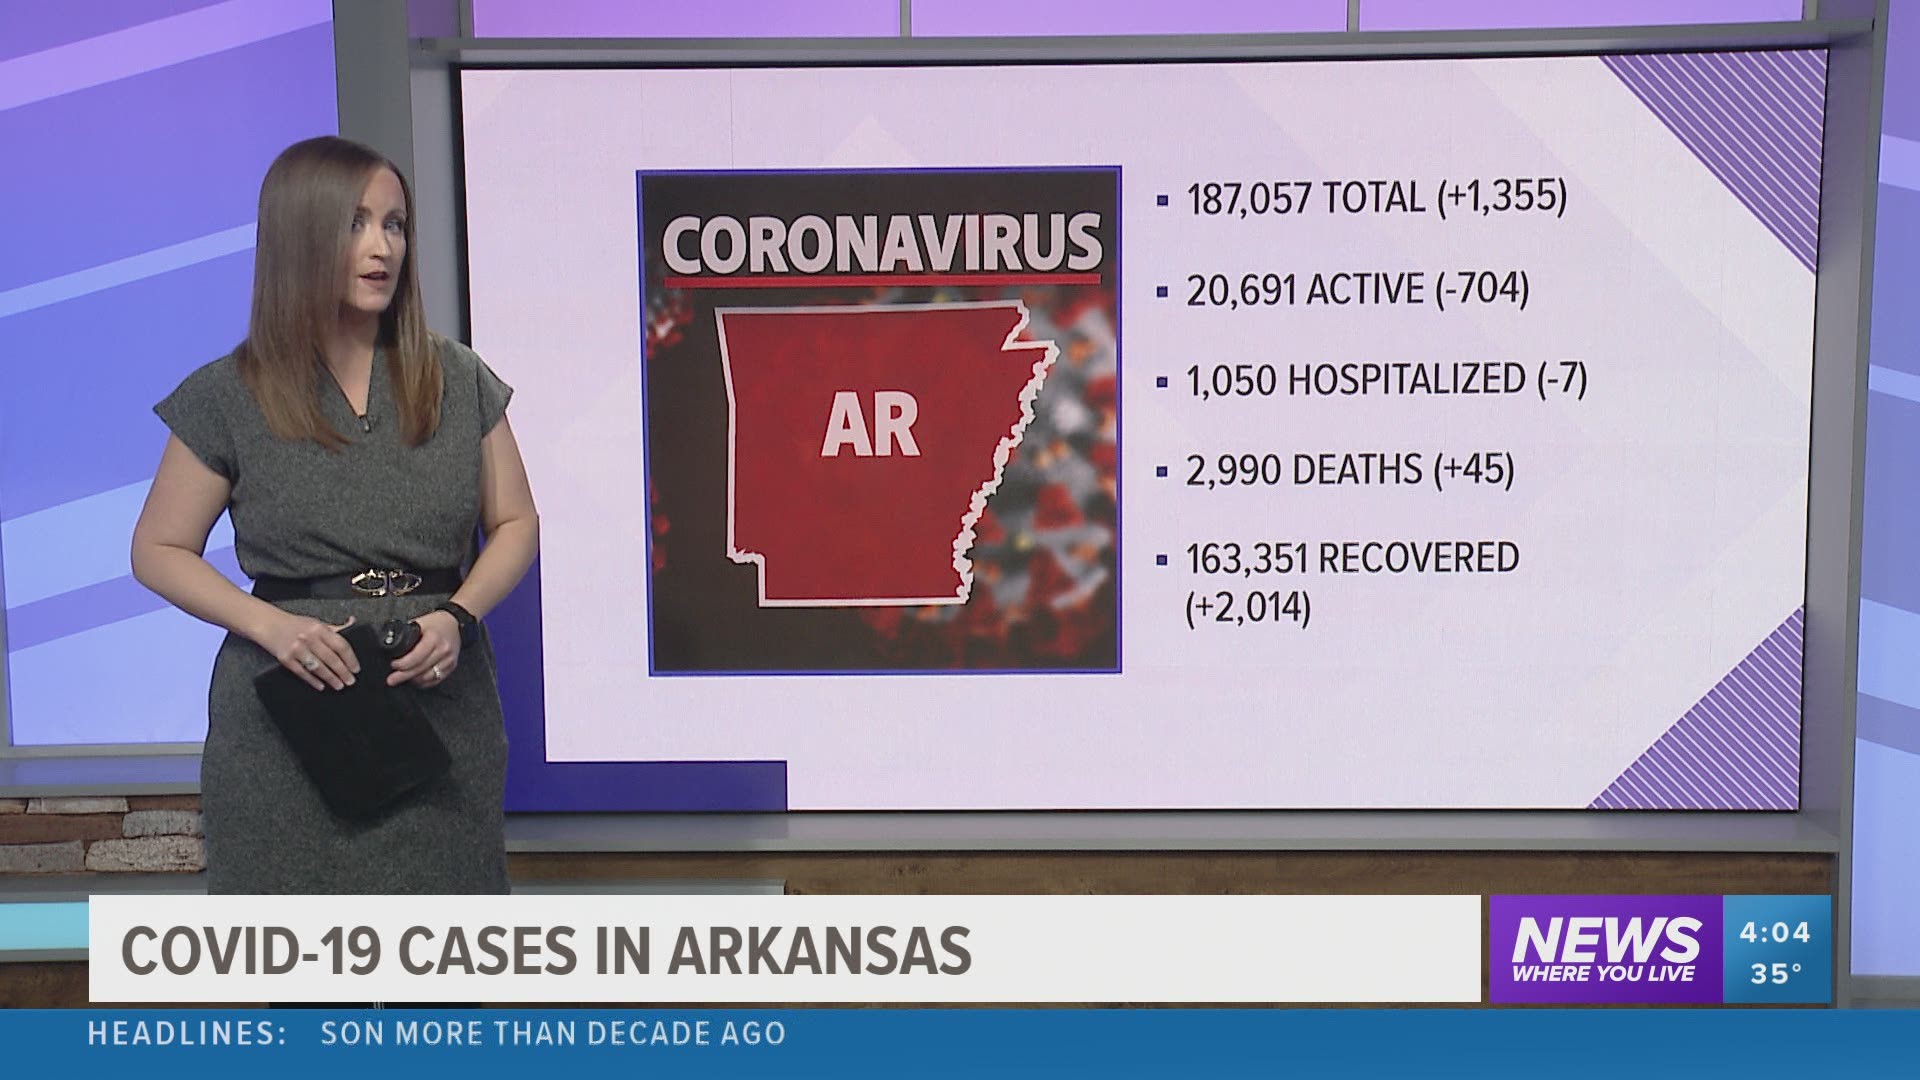 A look at the latest case numbers for the coronavirus in Arkansas on Monday, December 14. https://bit.ly/2Uygy5V